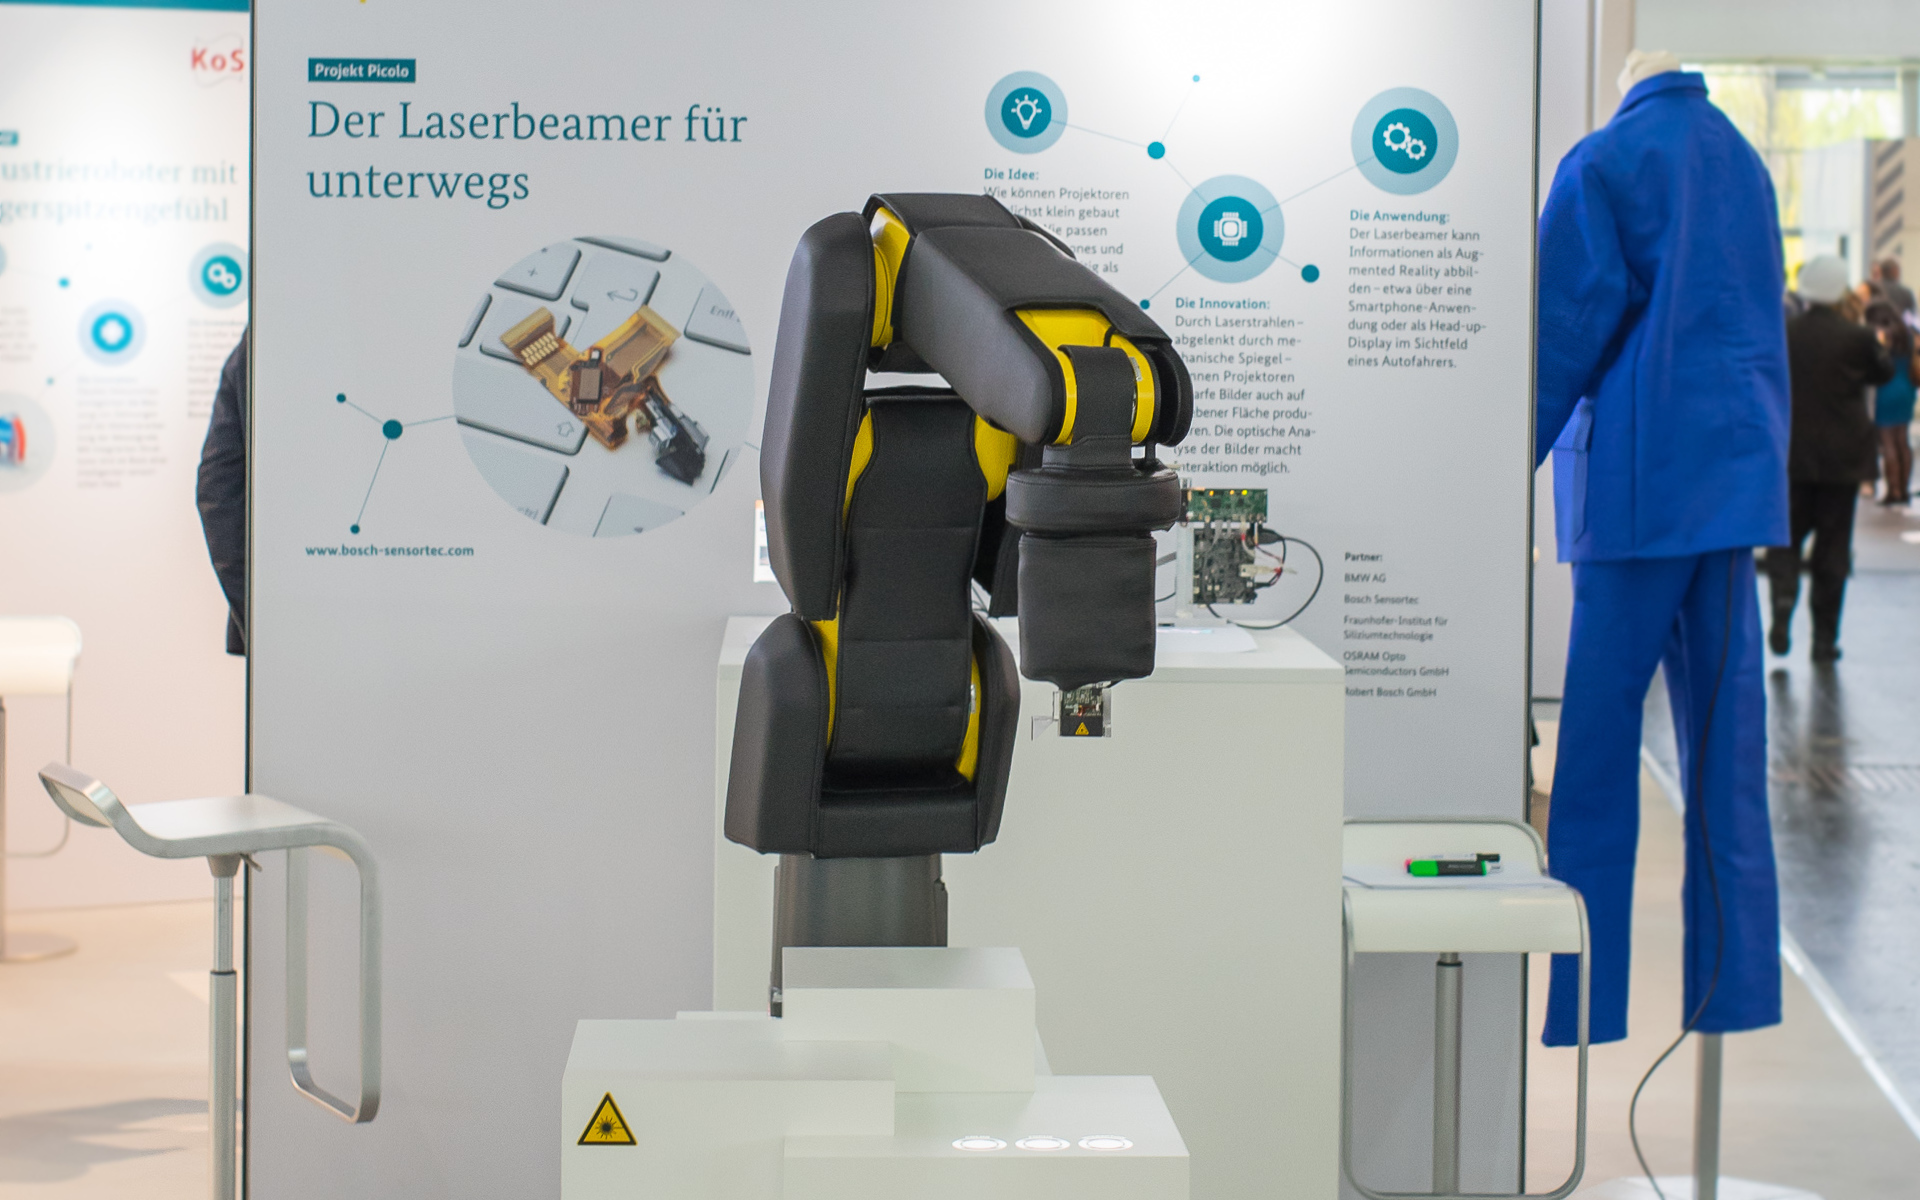 Robot using interactive laser projector to demonstrate an interface at Hanover Fair 2016.